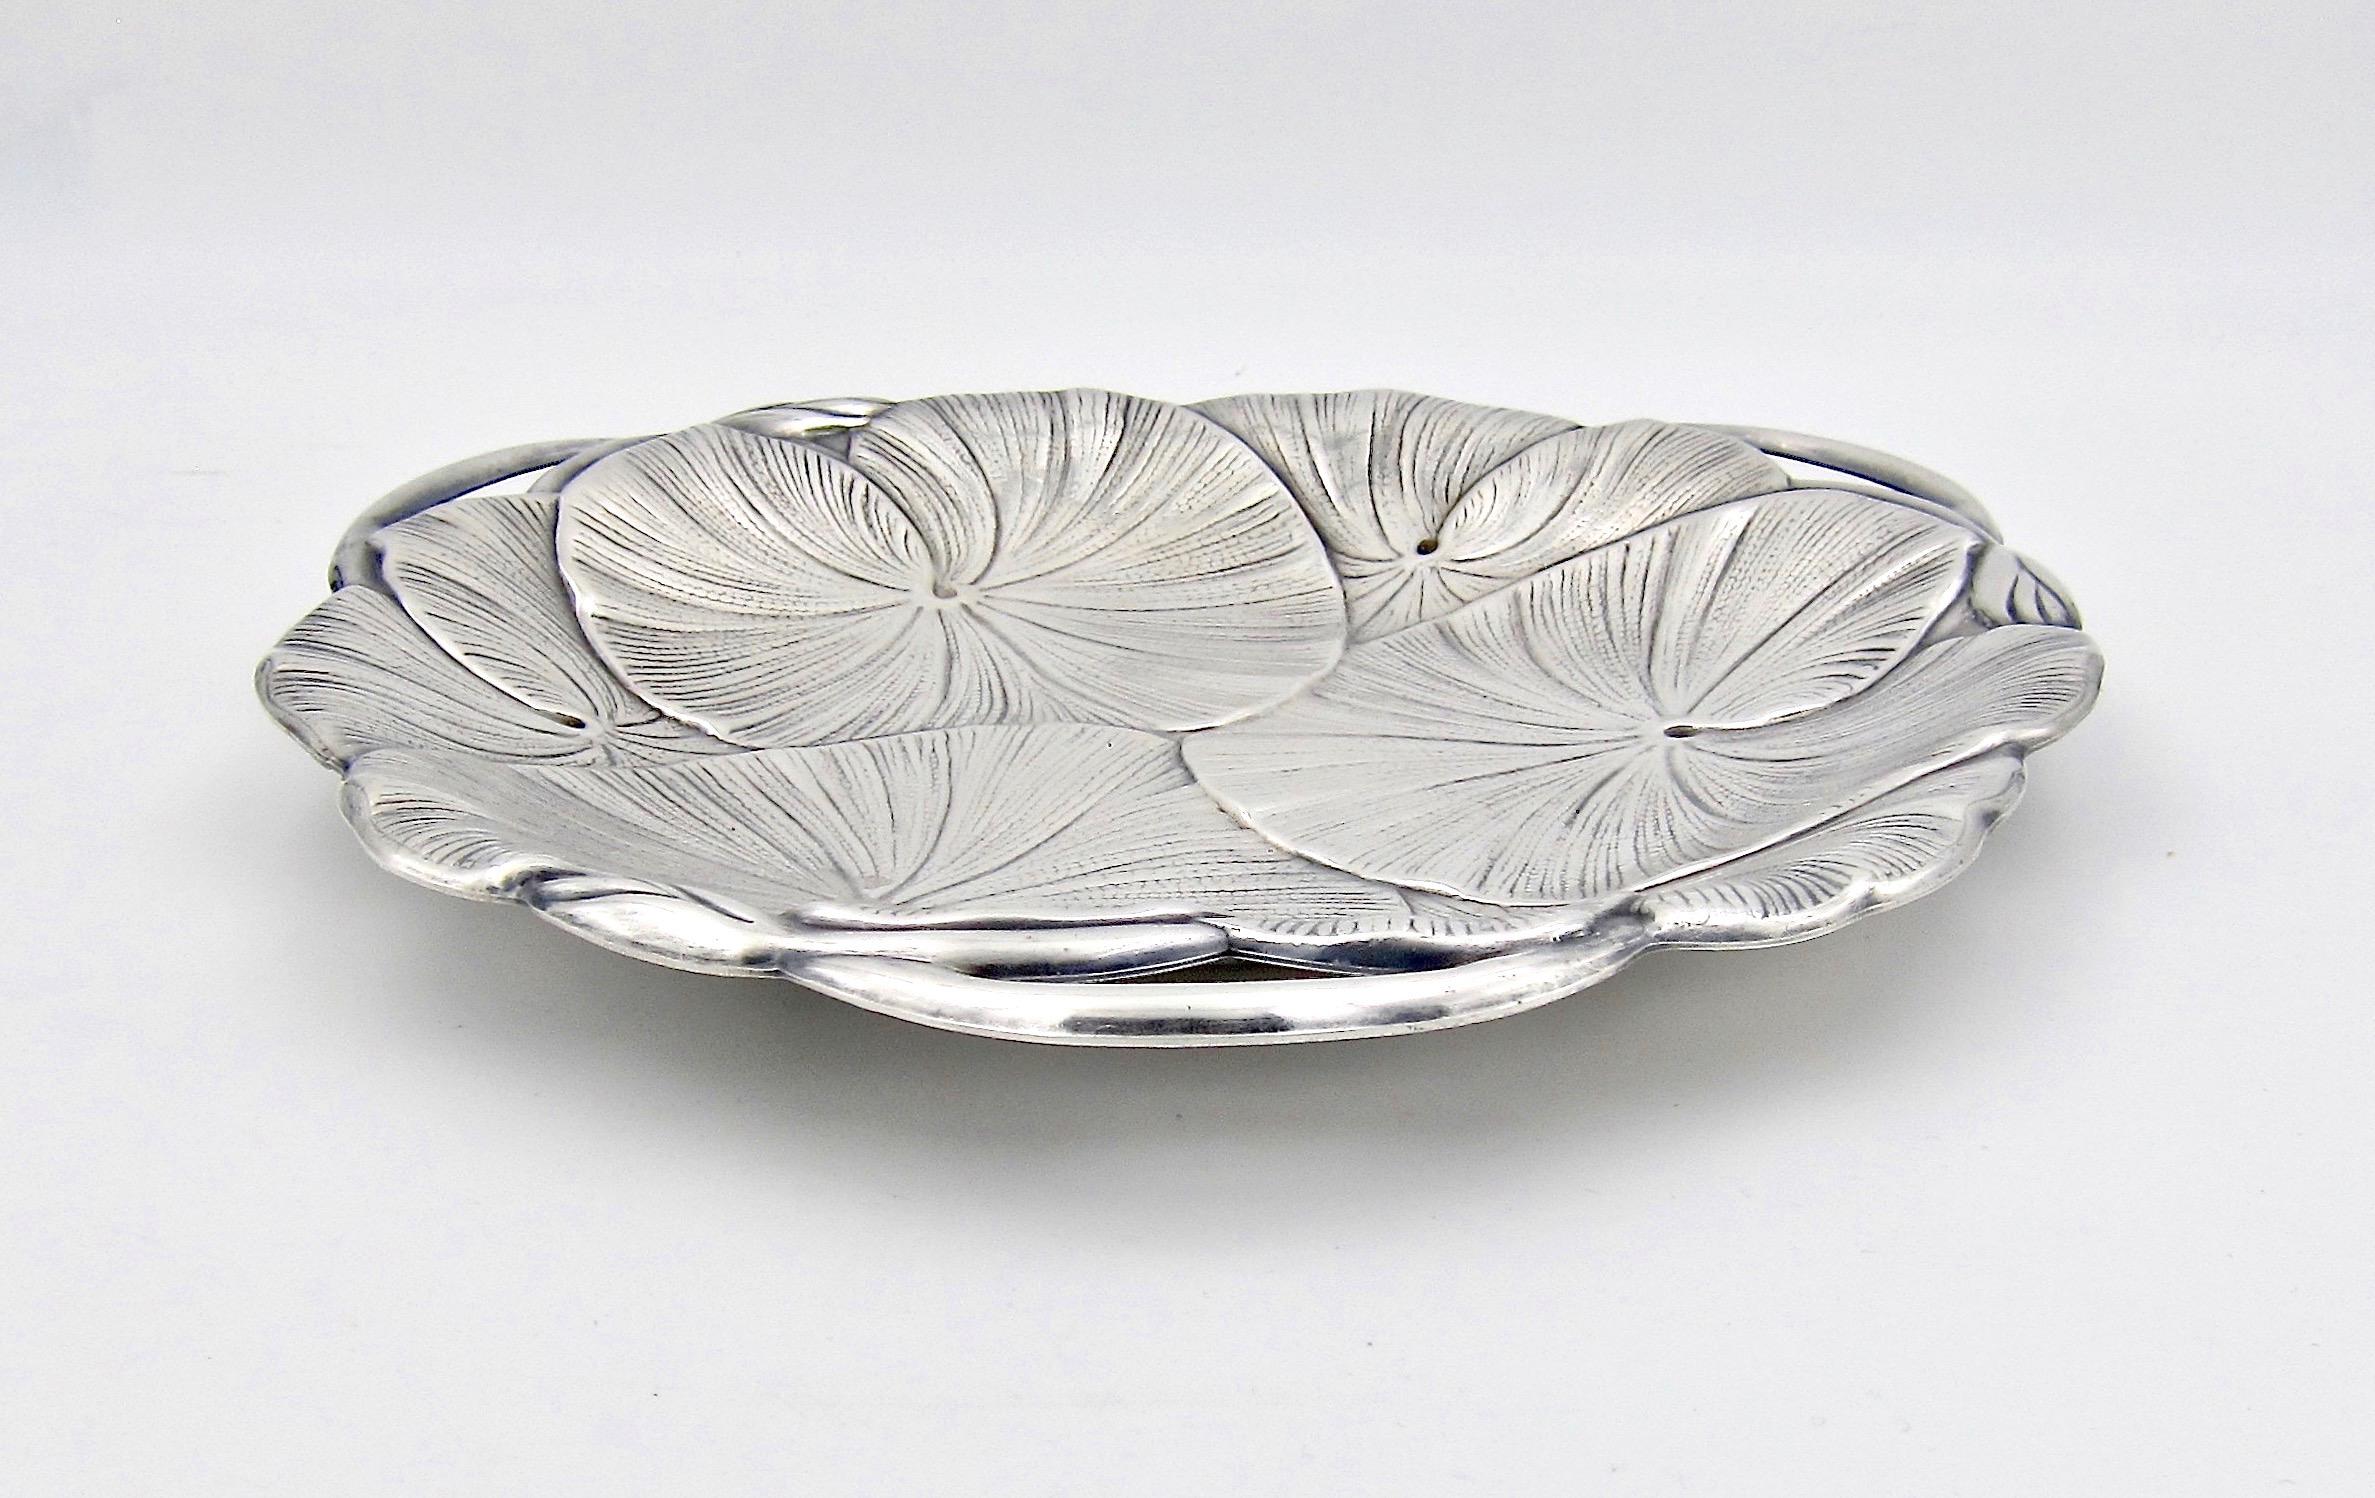 20th Century Art Nouveau Lily Pad Tray in Silver-Plate